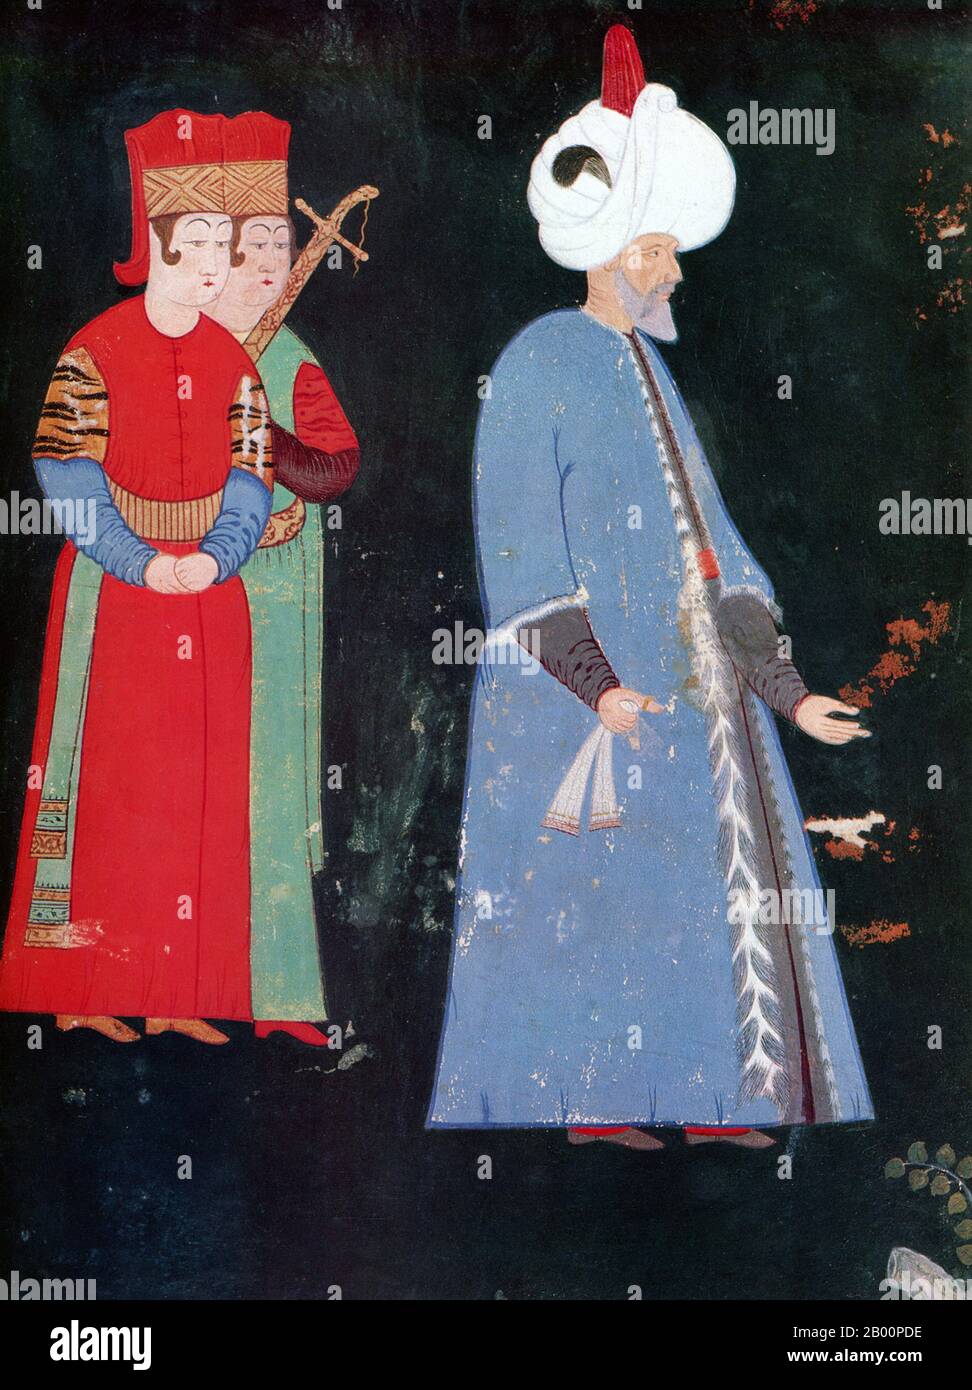 Turkey: Suleiman I (1494-1566), better known as Suleiman the Magnificent. Miniature by an unknown artist, late 16th century.  Suleiman I was the tenth and longest-reigning Sultan of the Ottoman Empire, from 1520 to his death in 1566. He is known in the West as Suleiman the Magnificent and in the East, as the Lawmaker for his complete reconstruction of the Ottoman legal system. Suleiman became a prominent monarch of 16th century Europe, presiding over the apex of the Ottoman Empire's military, political and economic power. Stock Photo